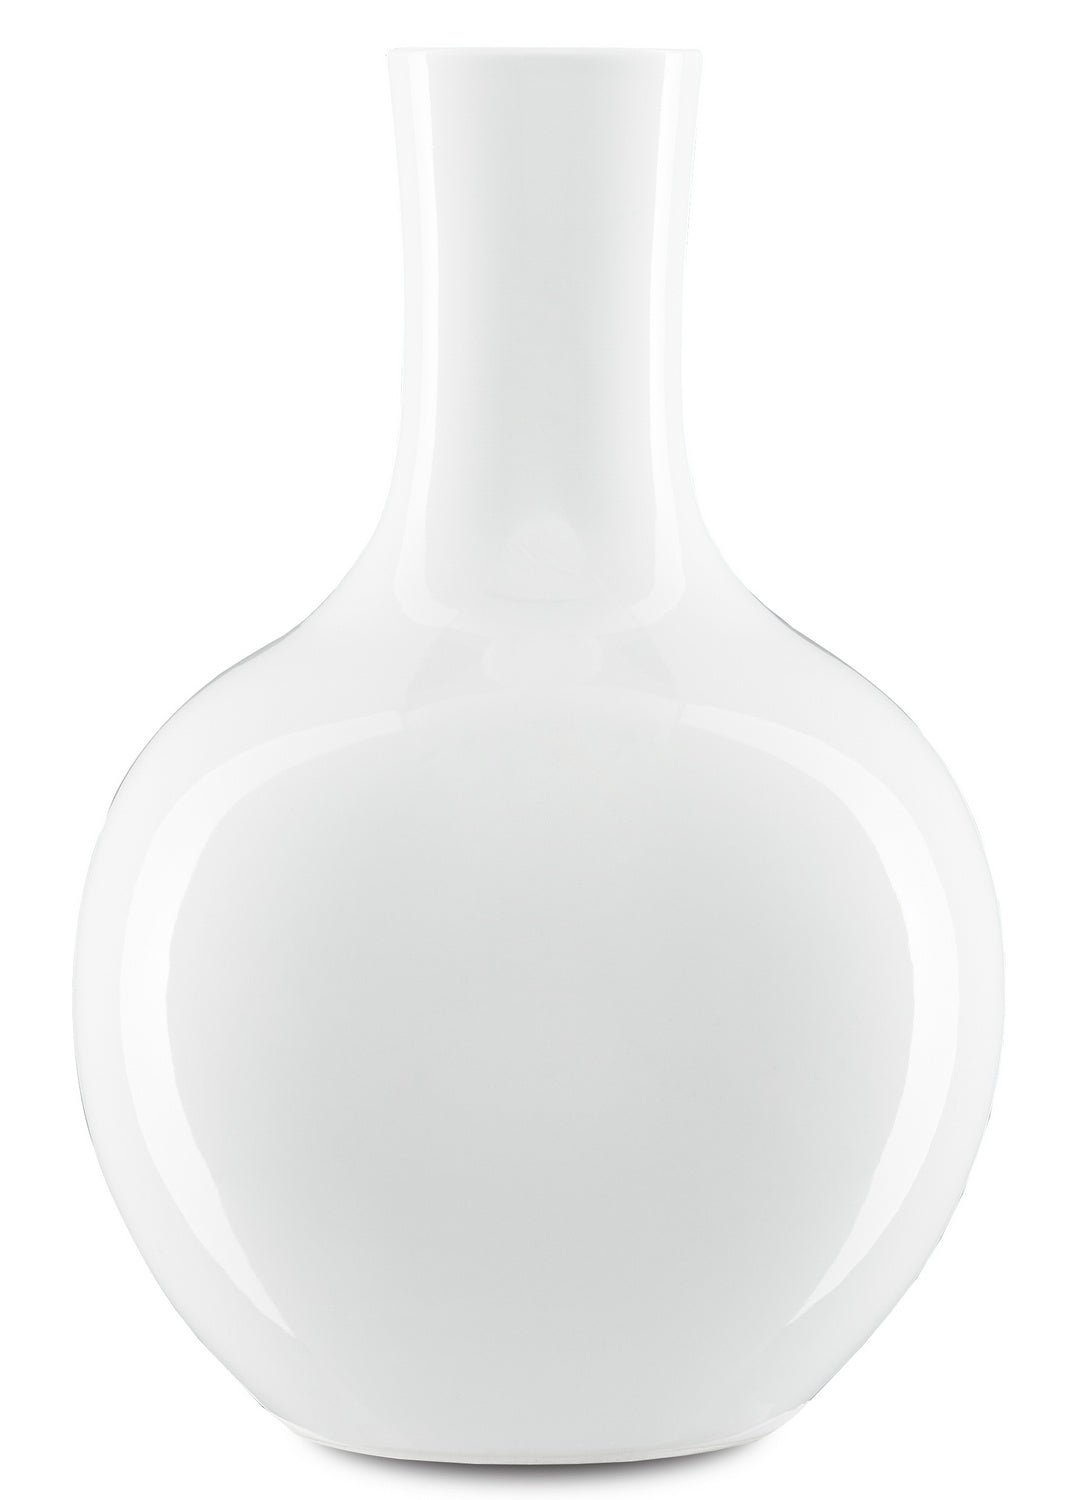 Vase from the Imperial collection in Imperial White finish